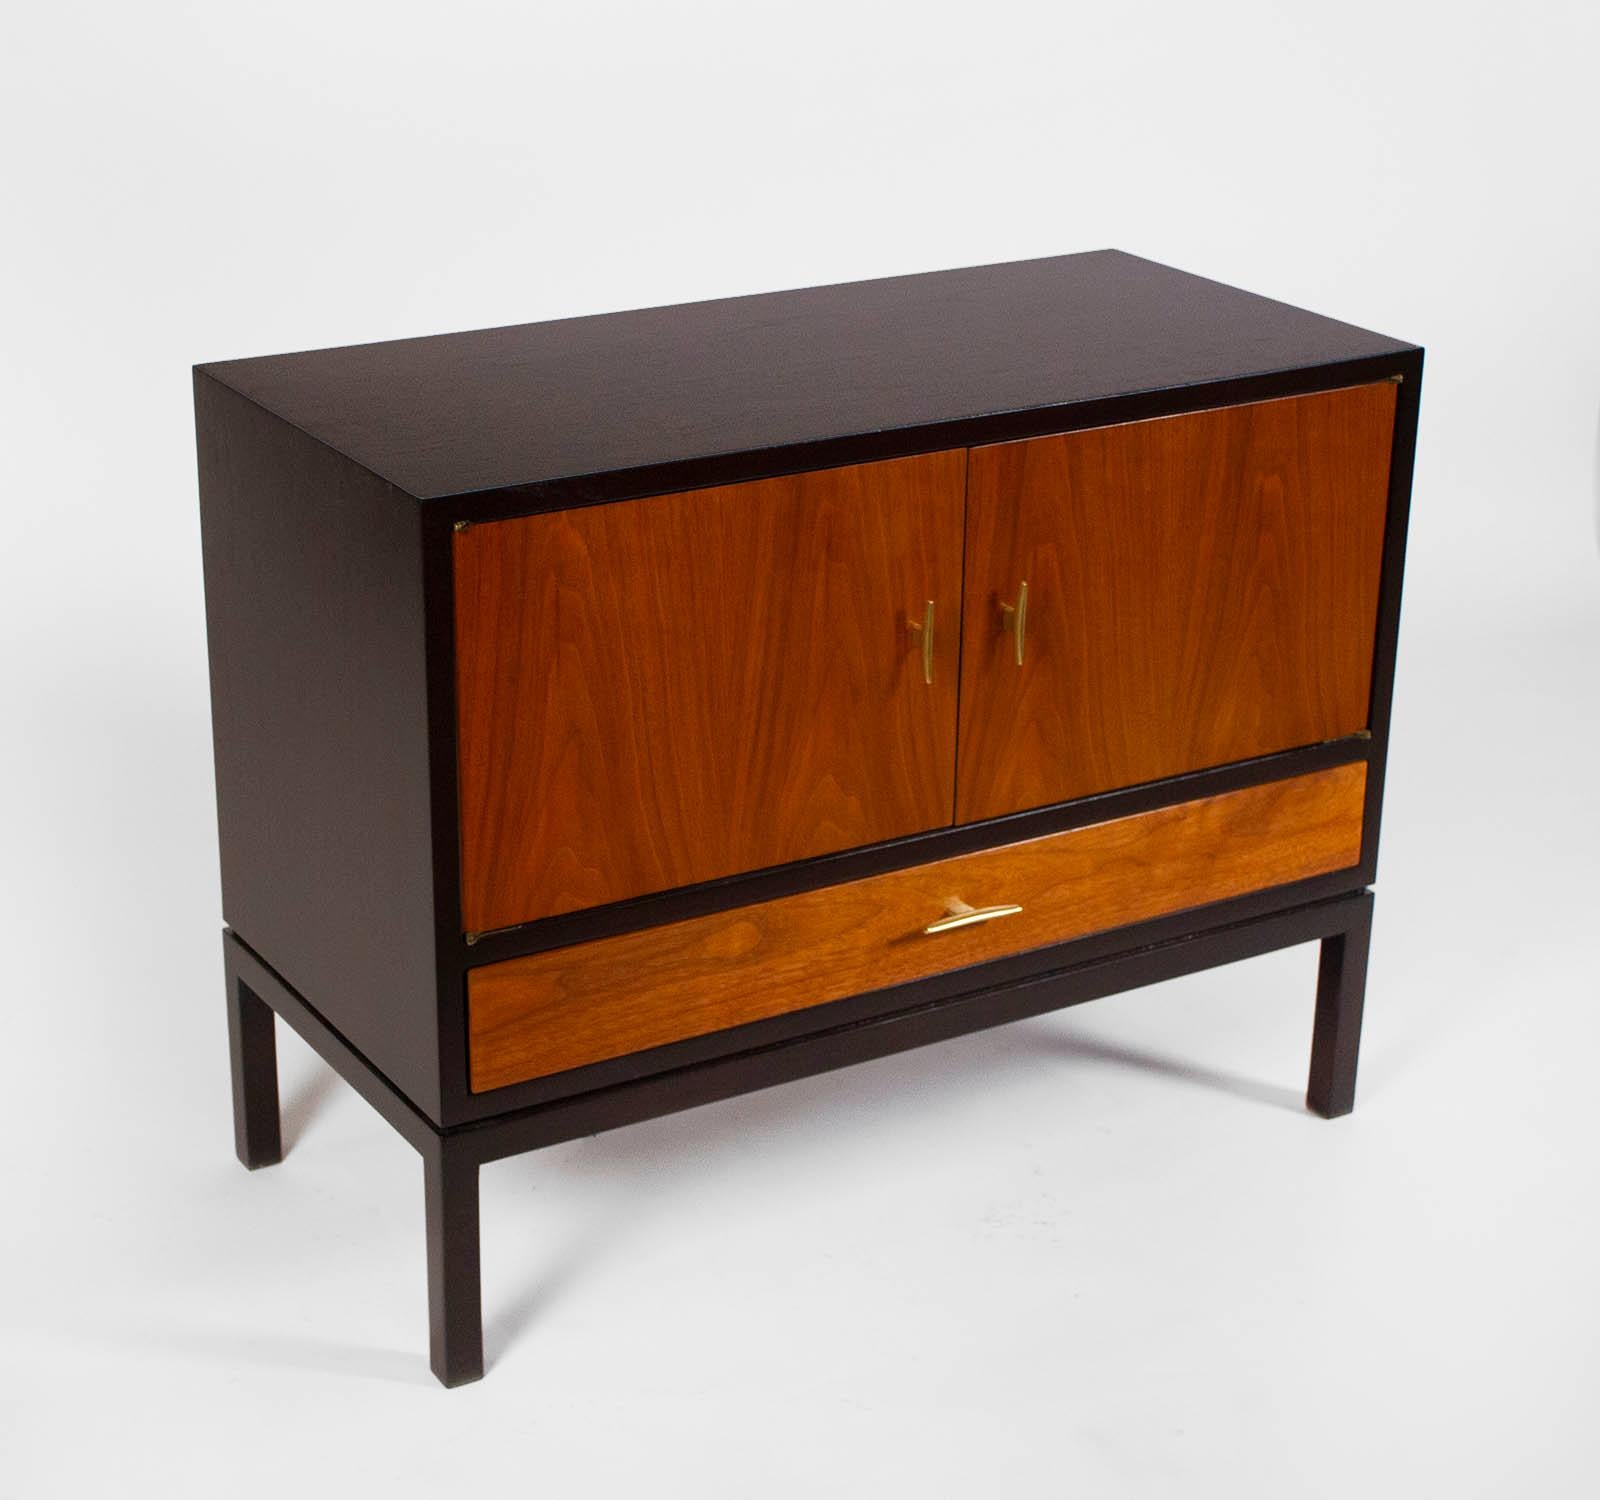 Dunbar small bedside cabinet or night stand Model #475 B with a satin dark espresso finish on the body and satin walnut doors and solid brass hardware. Fully restored.